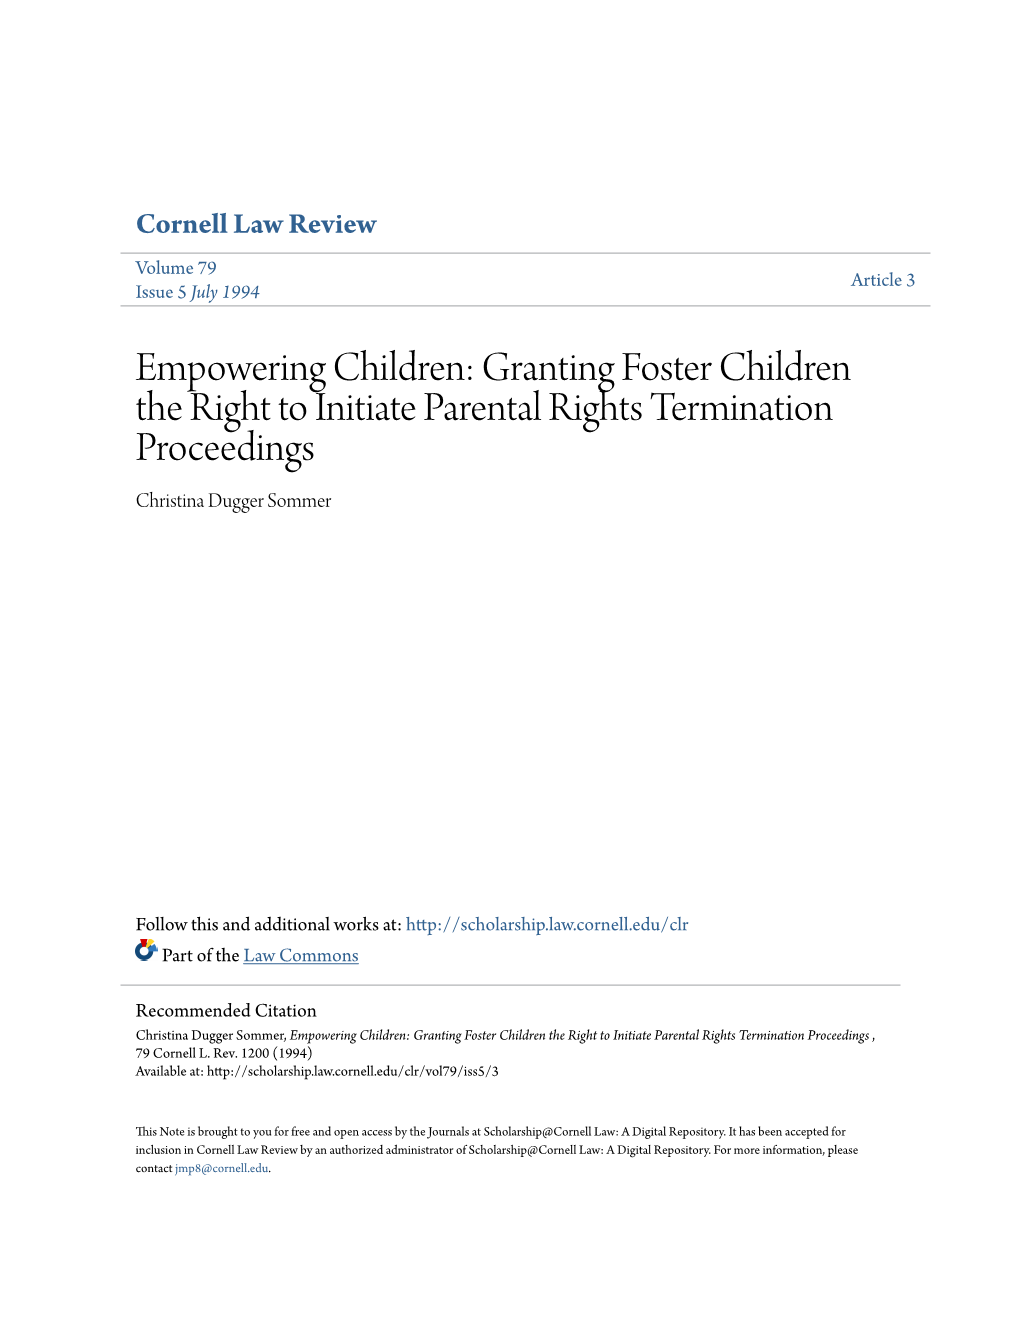 Granting Foster Children the Right to Initiate Parental Rights Termination Proceedings Christina Dugger Sommer